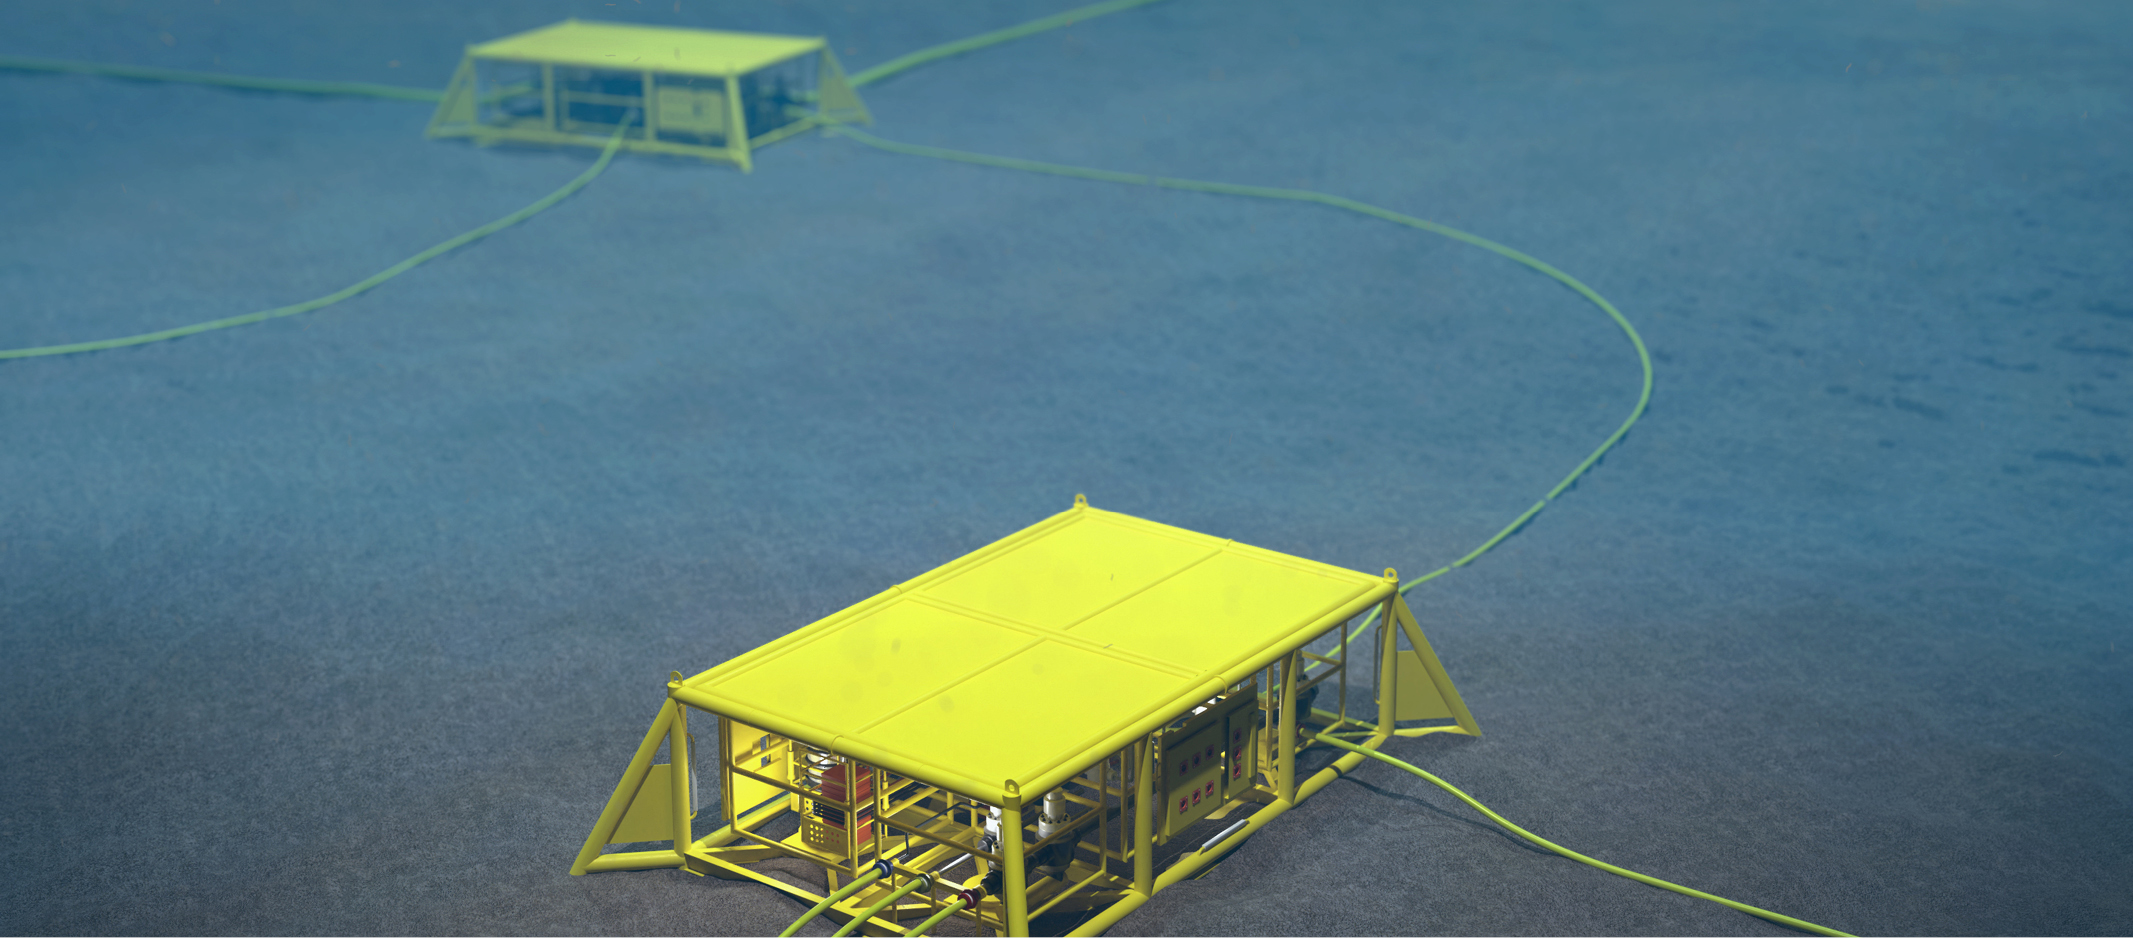 render of a subsea production system